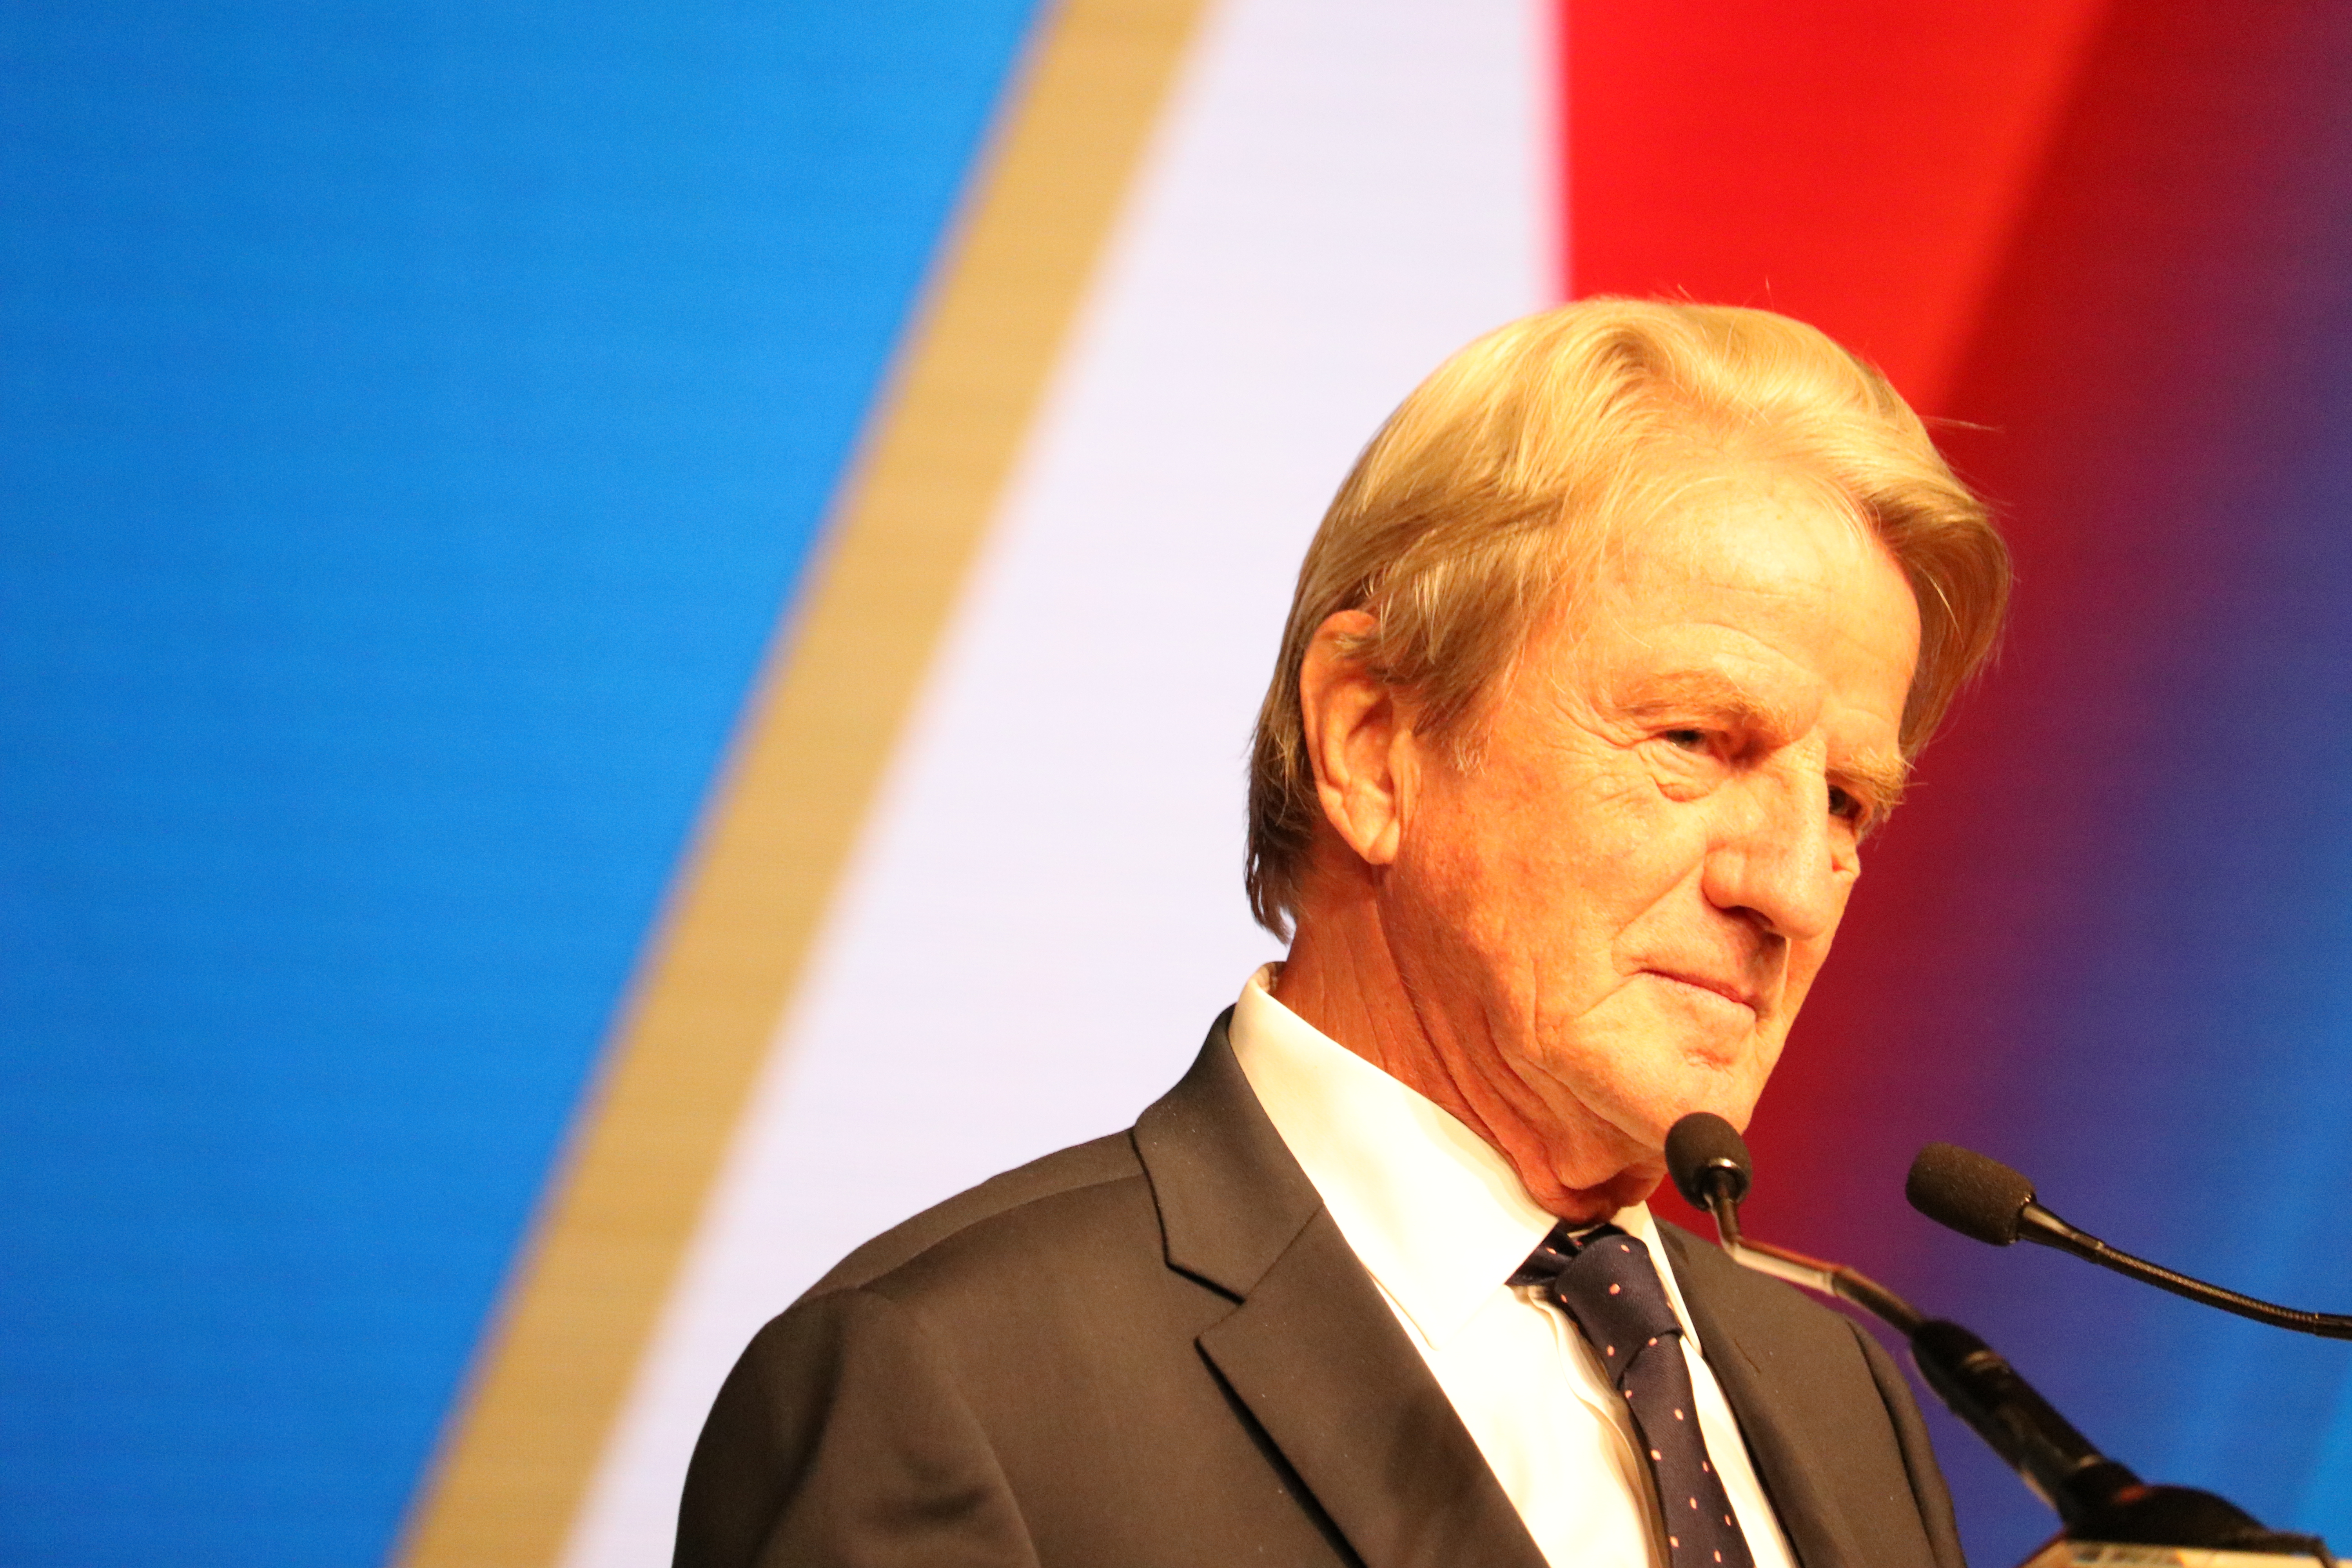 Bernard Kouchner: A Message to the Middle East